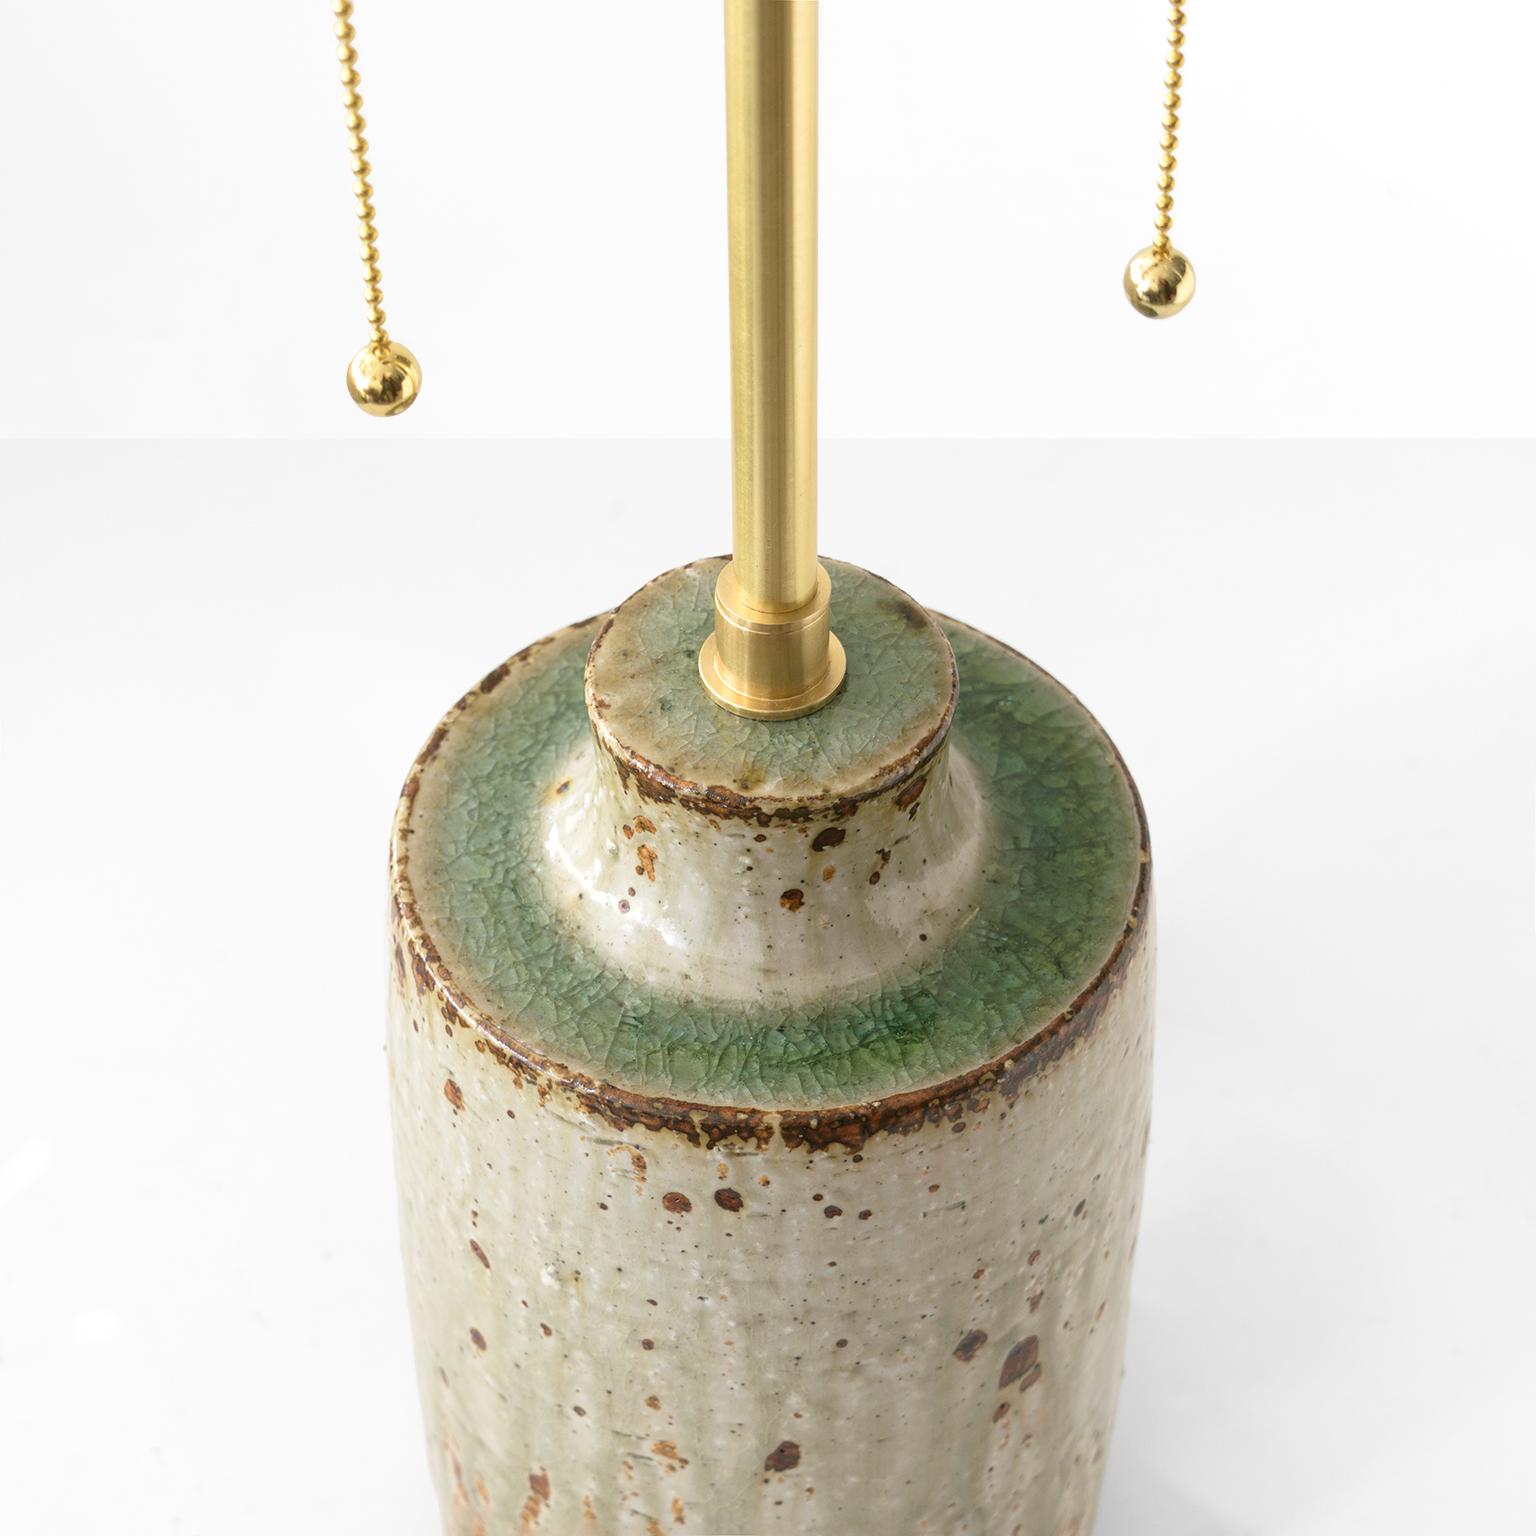 Hand-Crafted Marianne Westman ceramic Rorstrand Studio lamp, Sweden 1960 For Sale